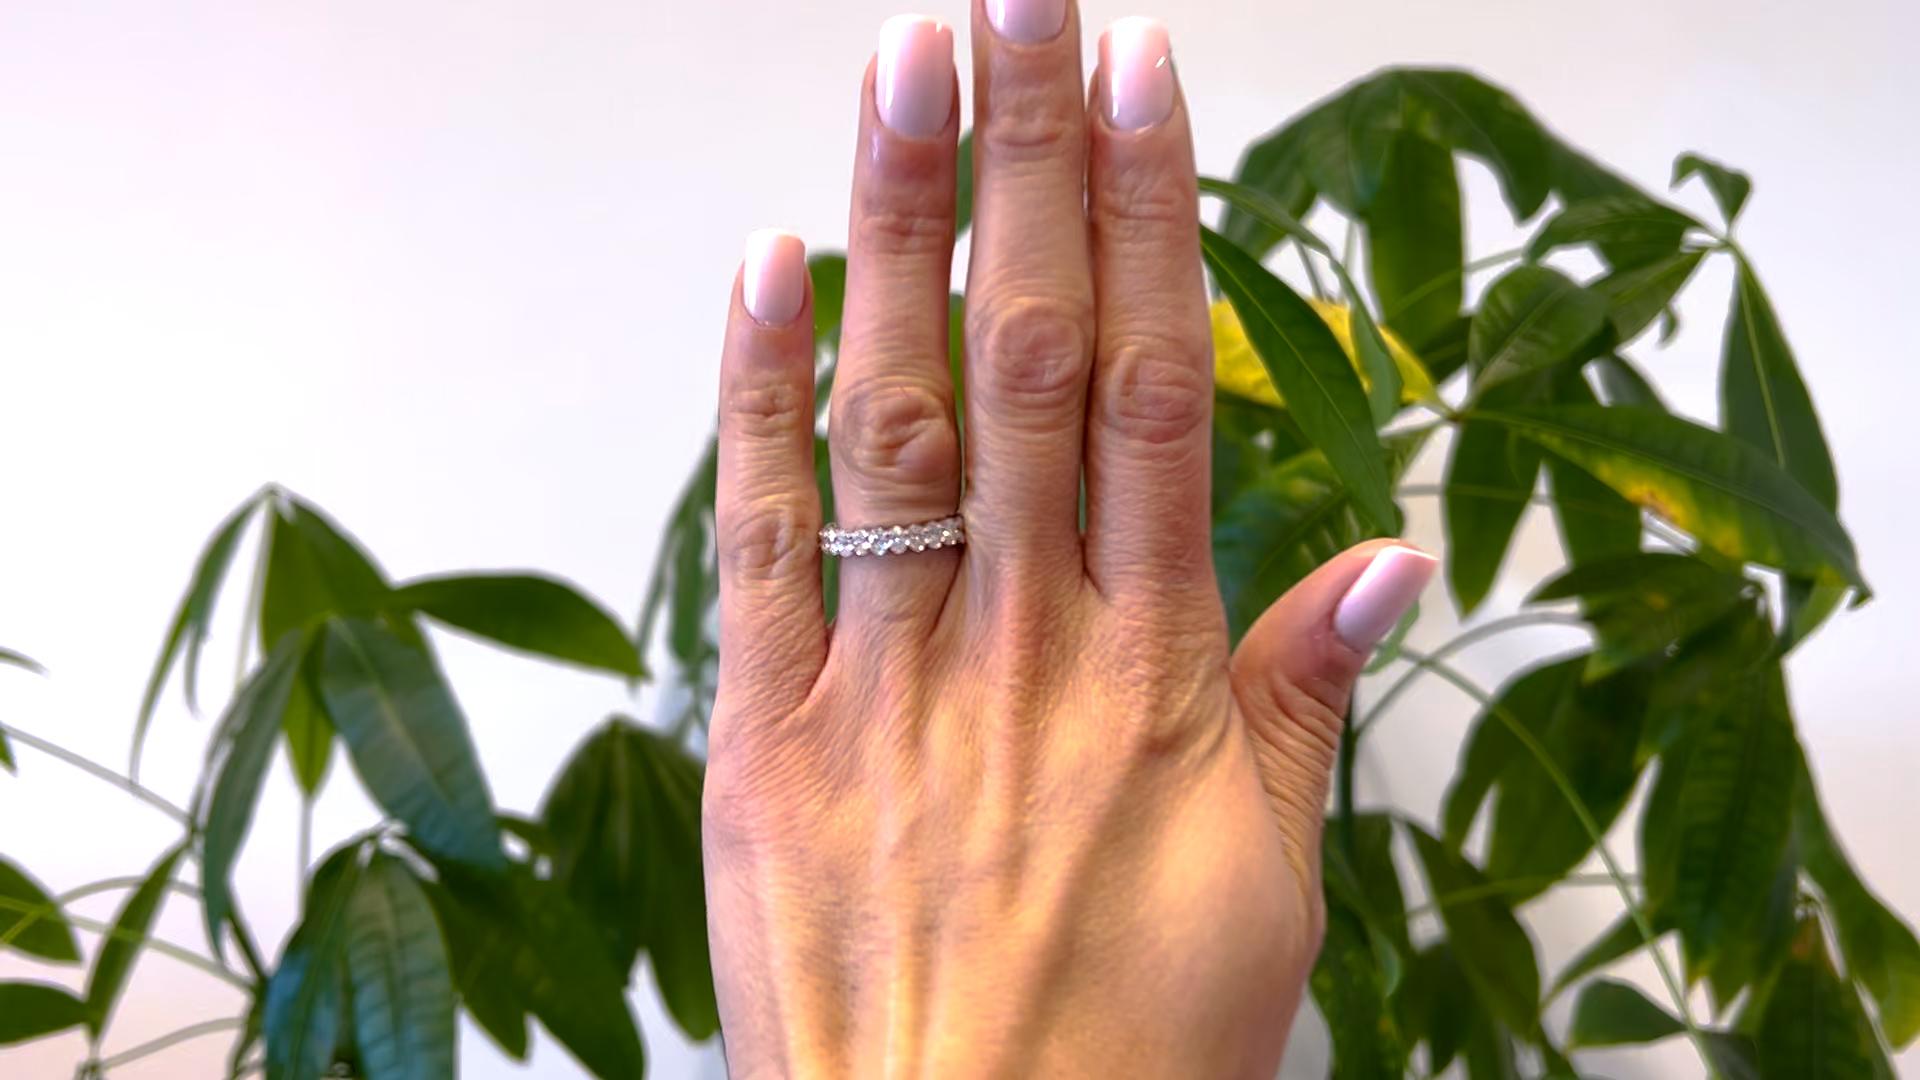 One 2.25 Carat Total Weight Oval Cut Diamond Platinum Eternity Band. Featuring 25 oval cut diamonds with a total weight of approximately 2.25 carats, graded near-colorless, VS clarity. Crafted in platinum. Circa 2020. The ring is a size 6 ½ and may